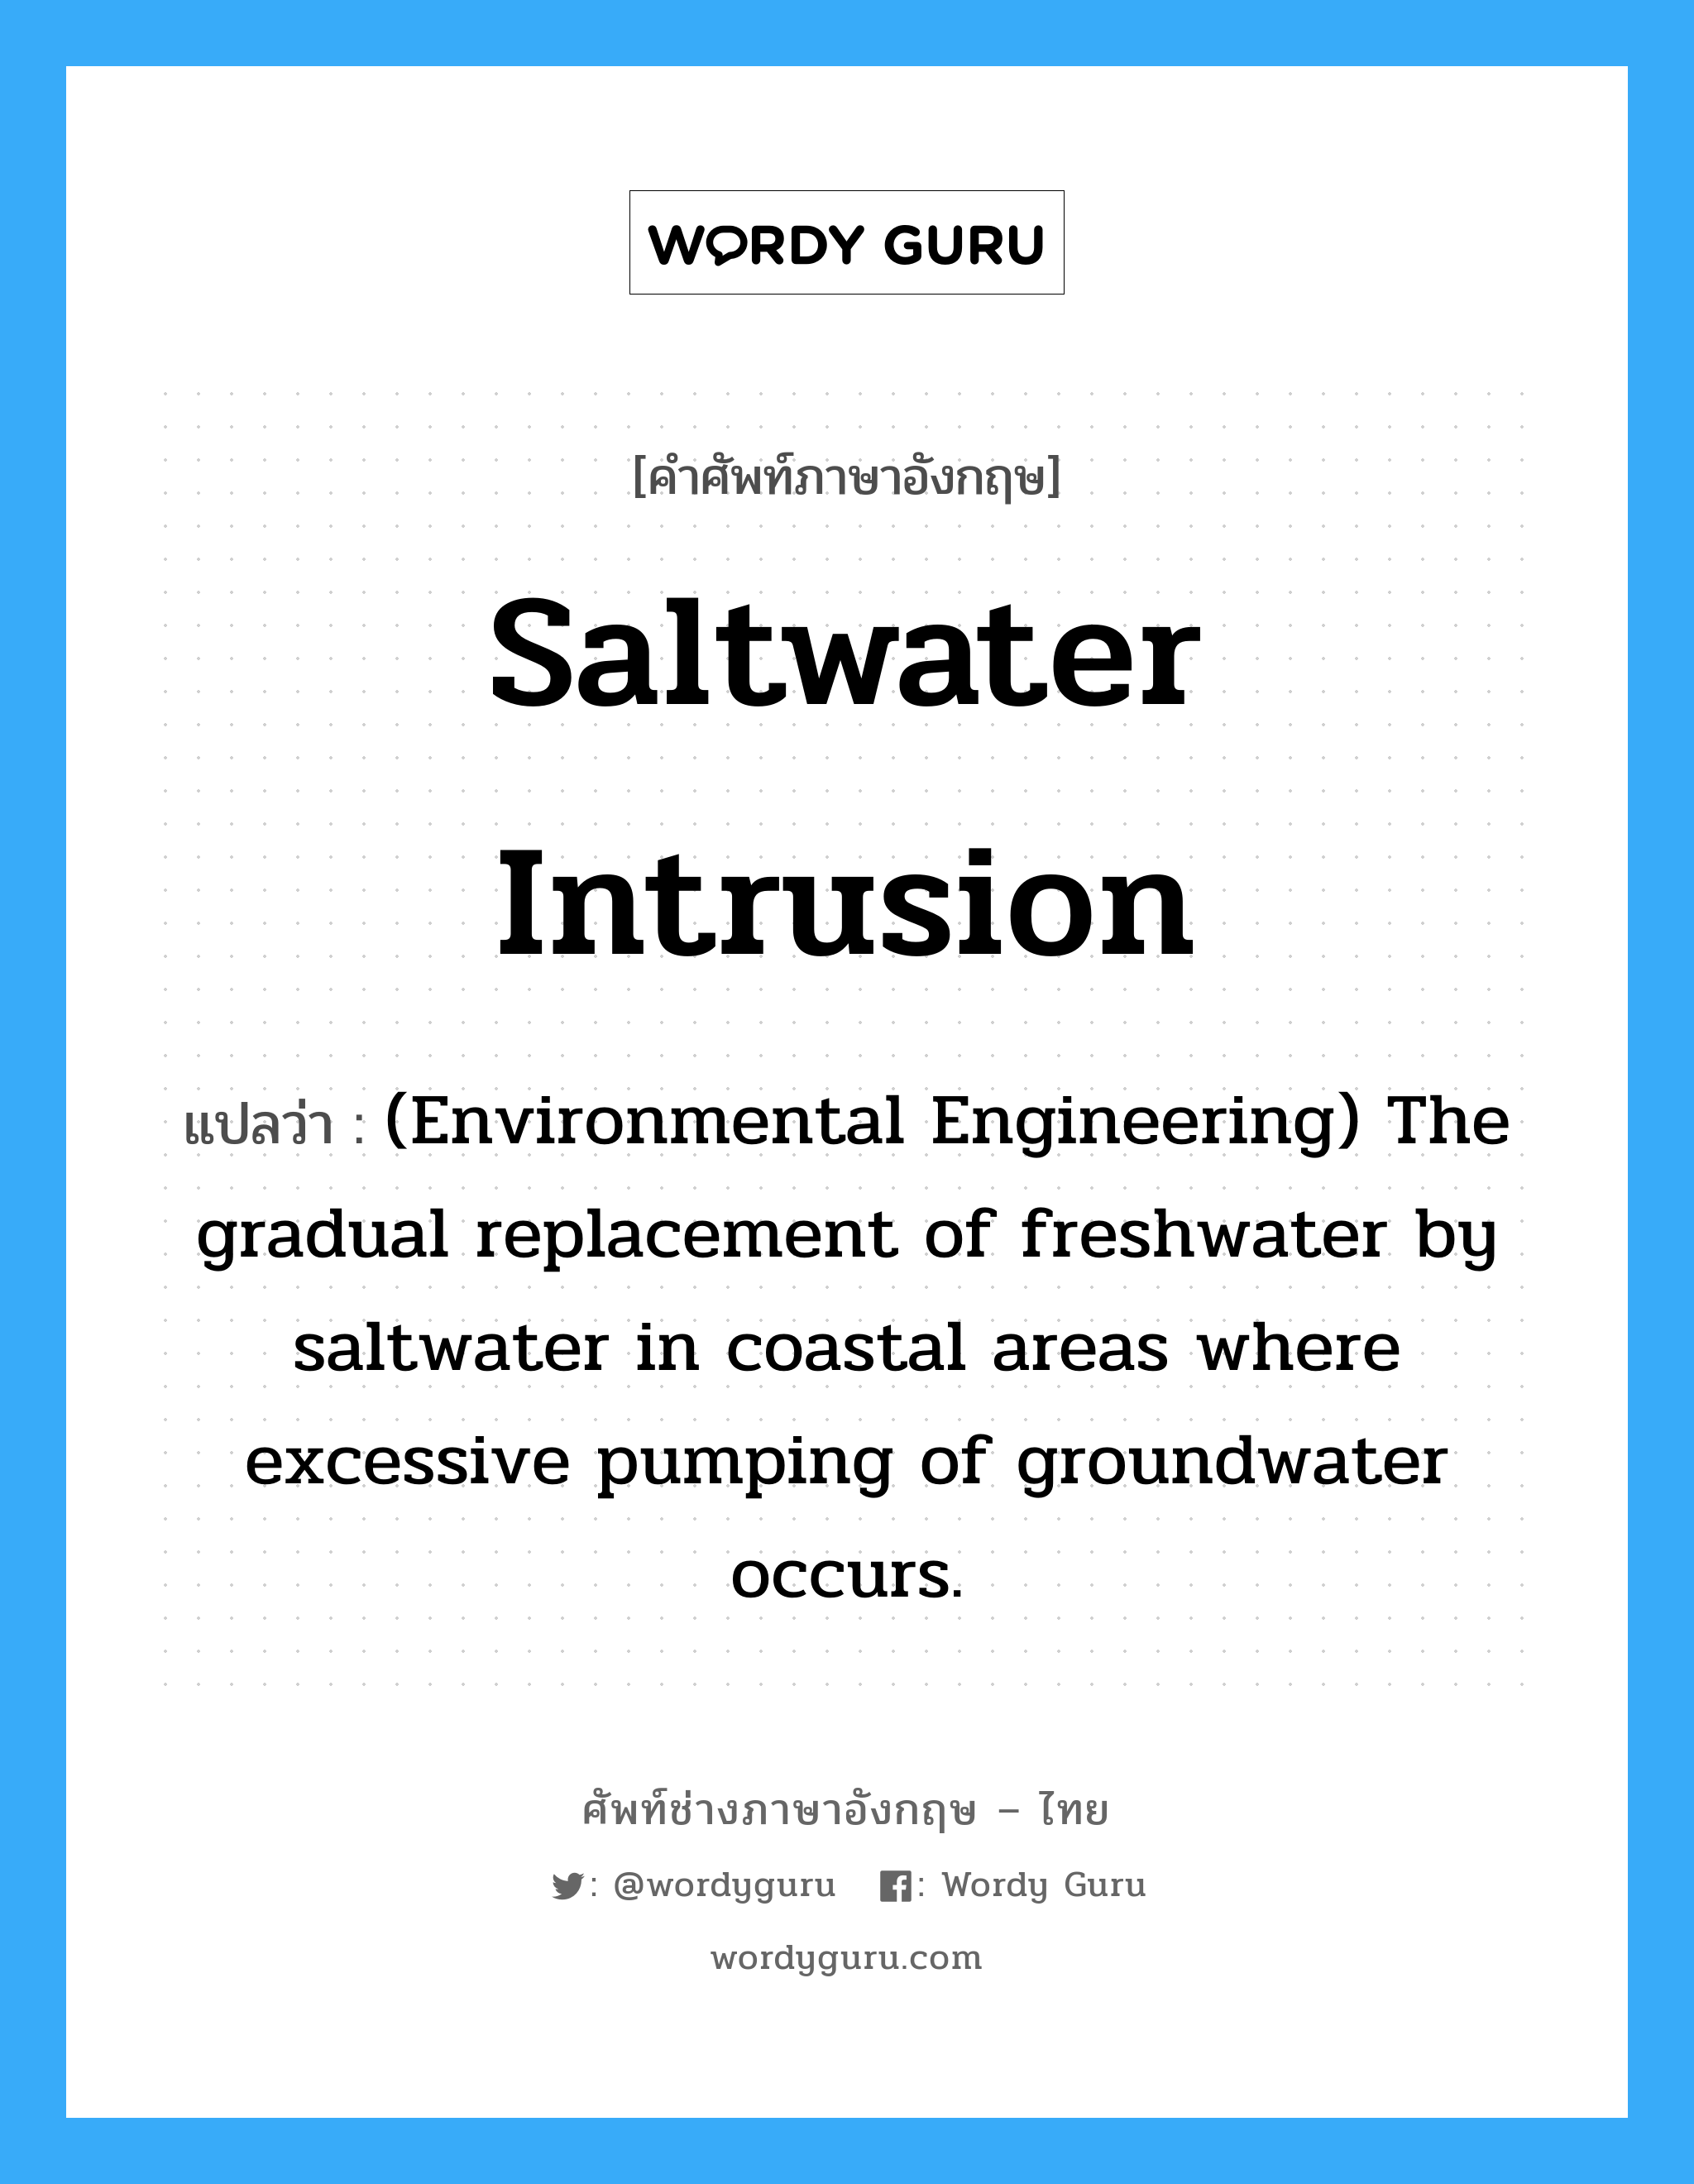 Saltwater intrusion แปลว่า?, คำศัพท์ช่างภาษาอังกฤษ - ไทย Saltwater intrusion คำศัพท์ภาษาอังกฤษ Saltwater intrusion แปลว่า (Environmental Engineering) The gradual replacement of freshwater by saltwater in coastal areas where excessive pumping of groundwater occurs.